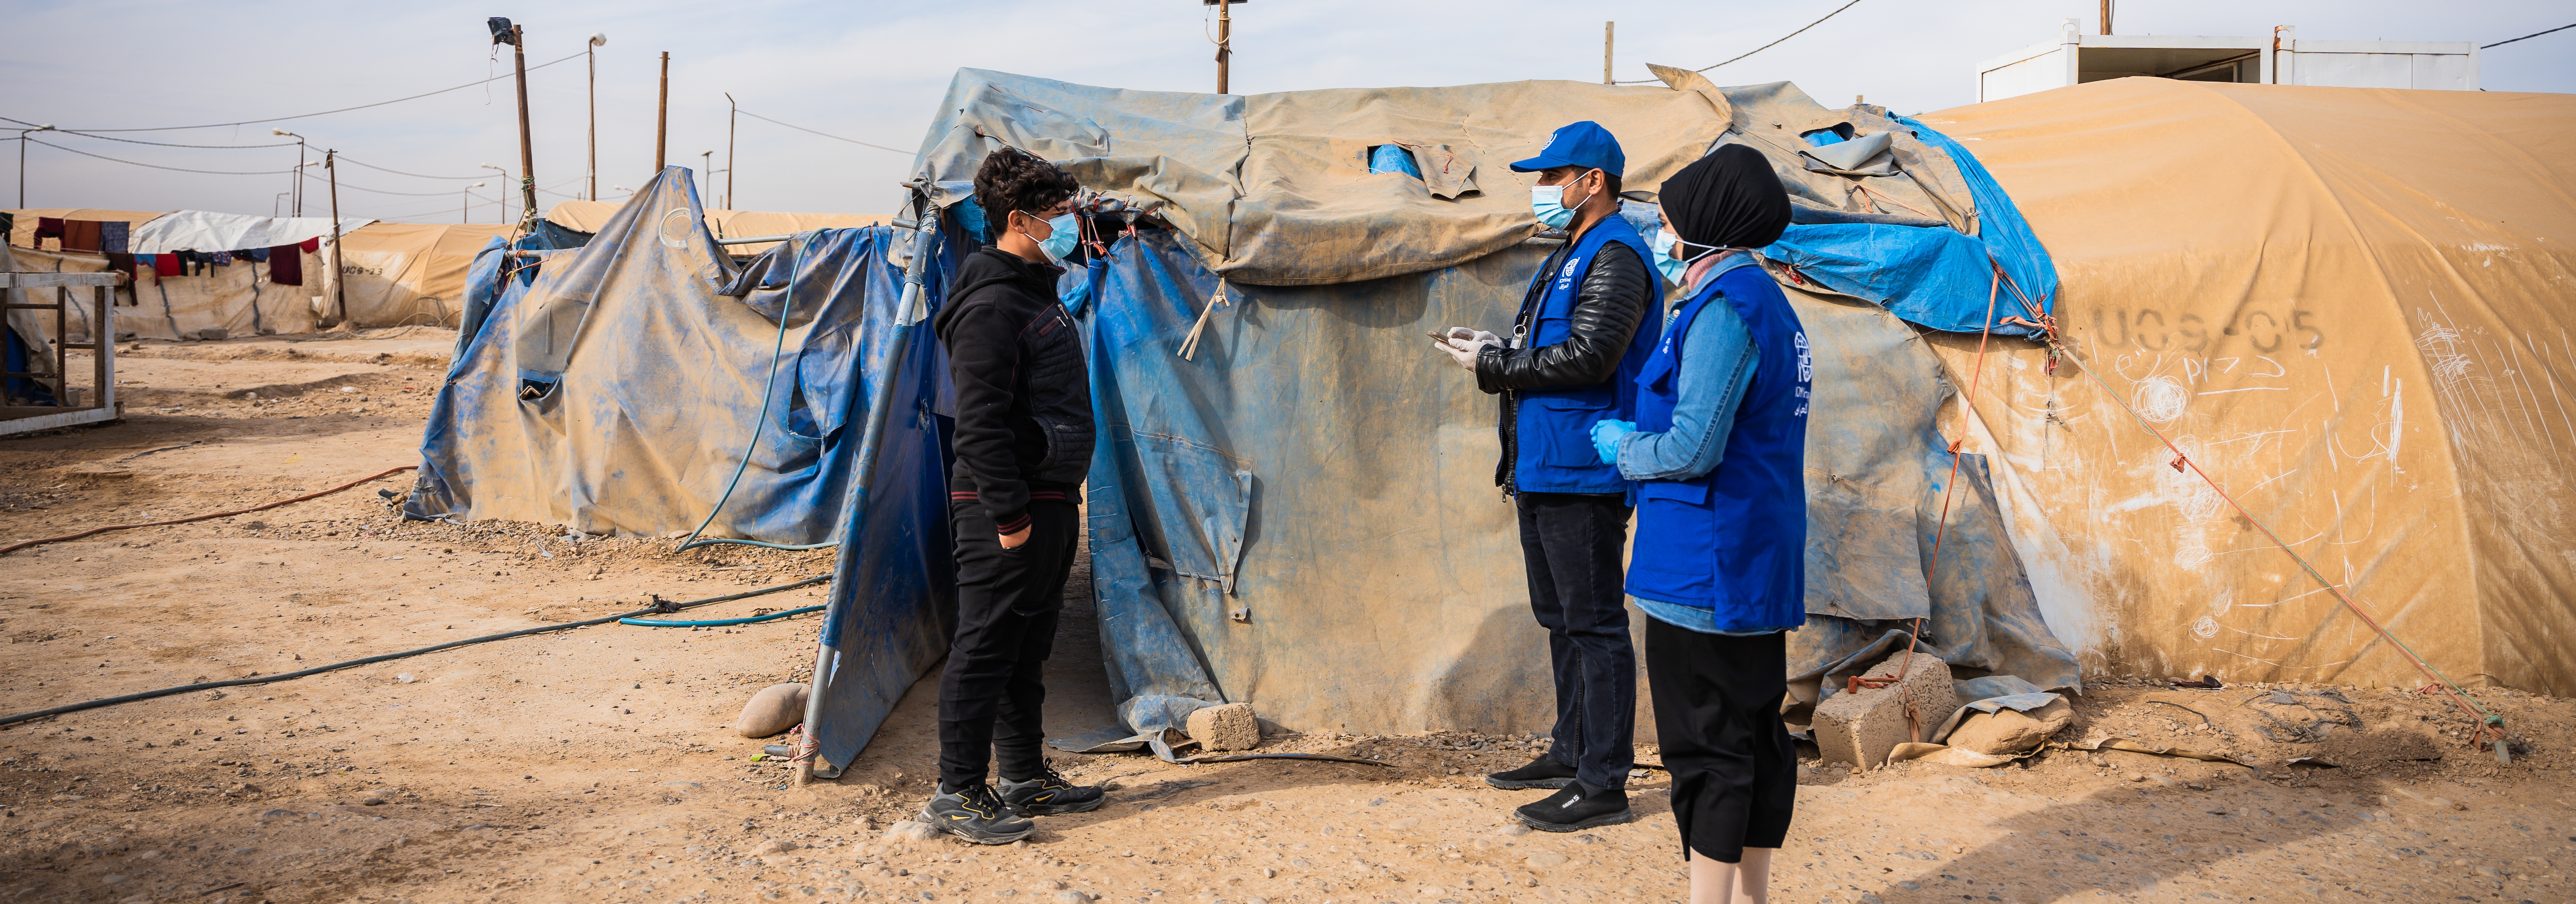 Risk Communication and Community Engagement (RCCE) in IDP camp. Photo: ©IOM Iraq 2021/Yad Abdulqader